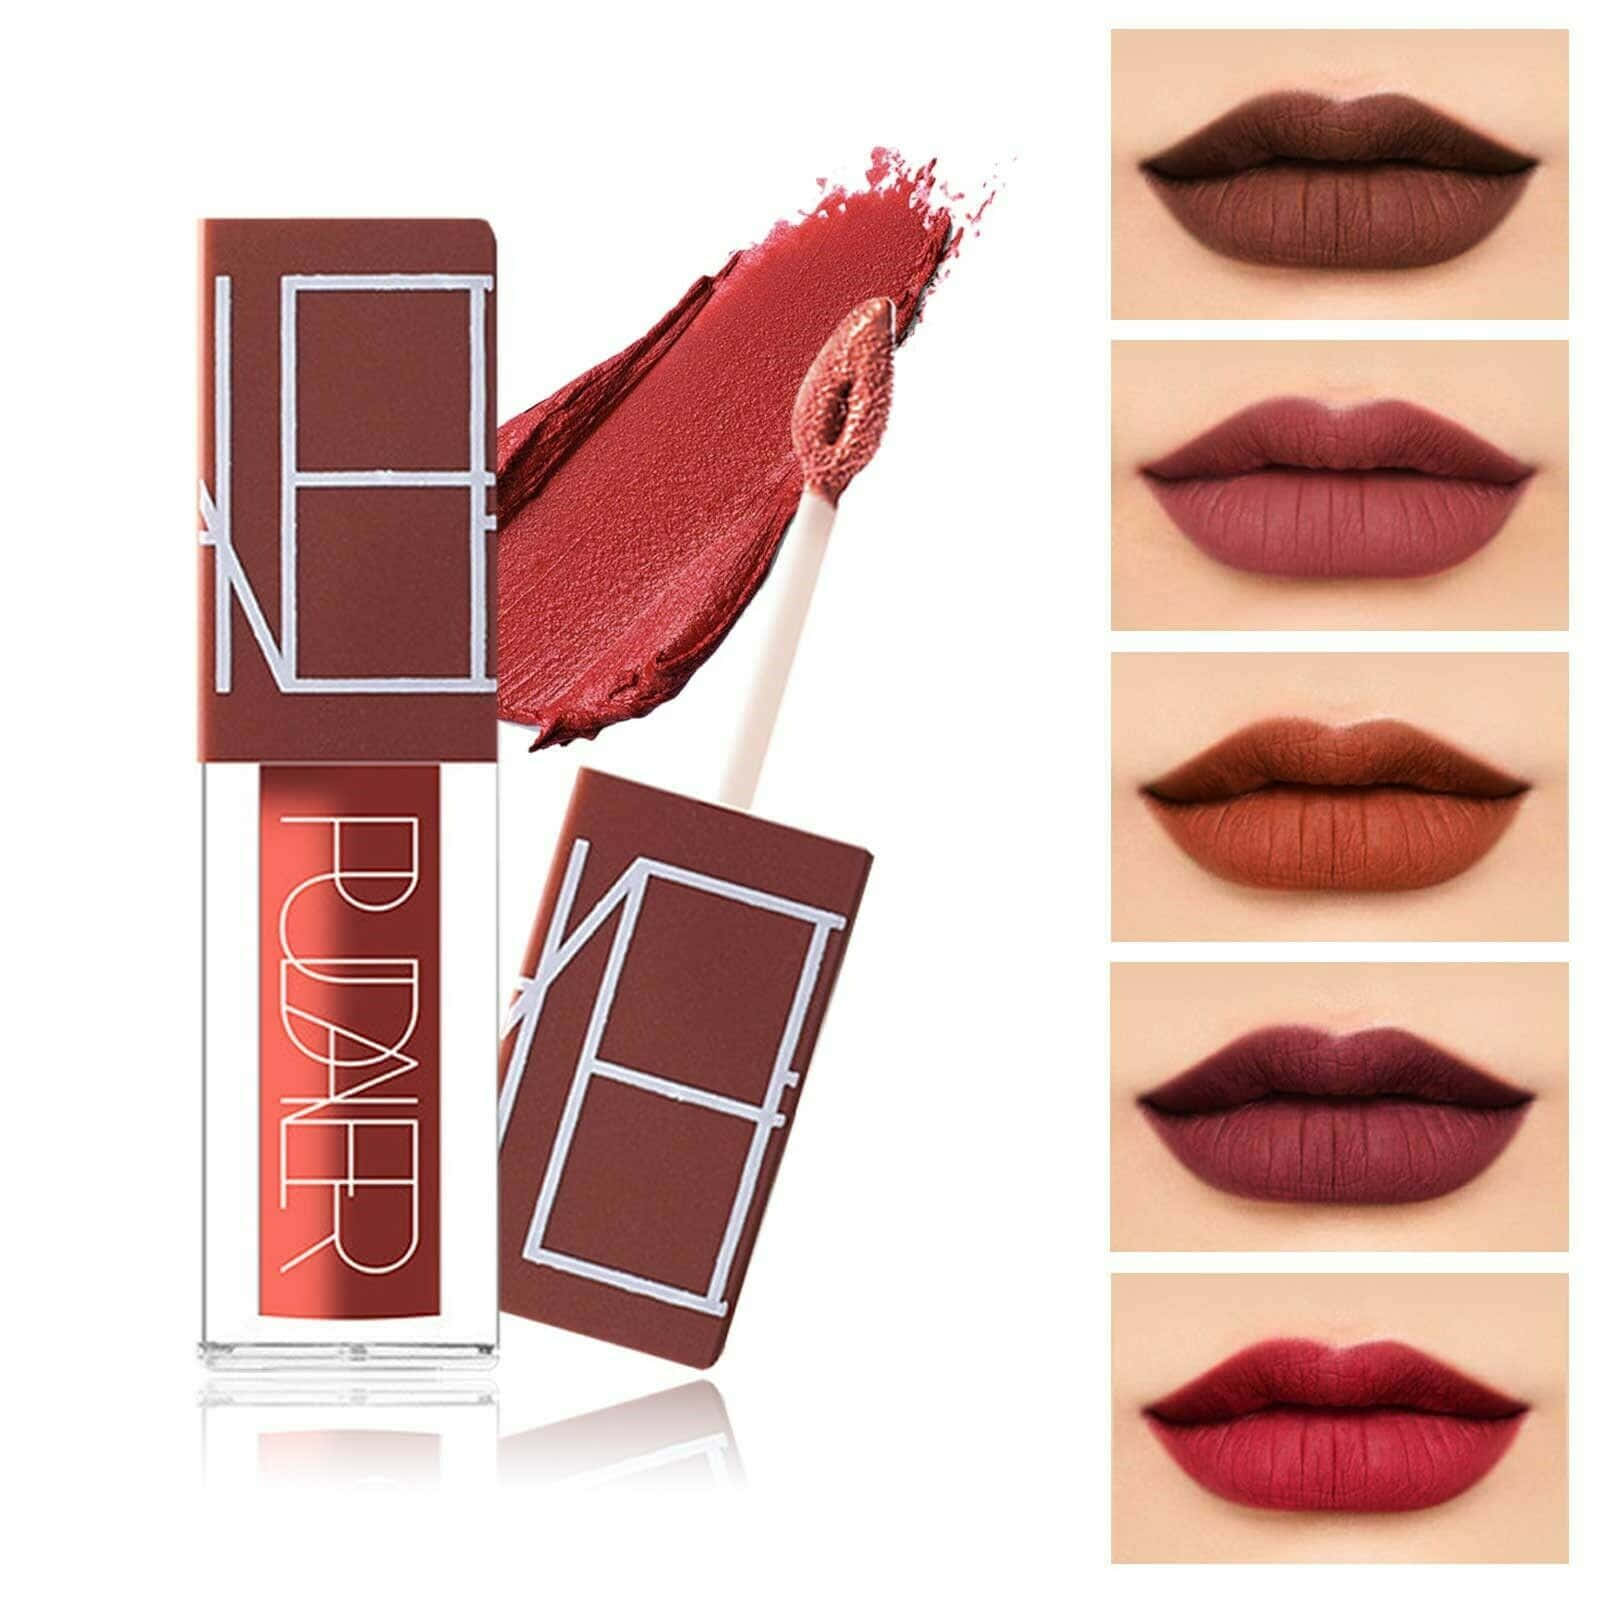 Nebula Lip Gloss In Red And Brown